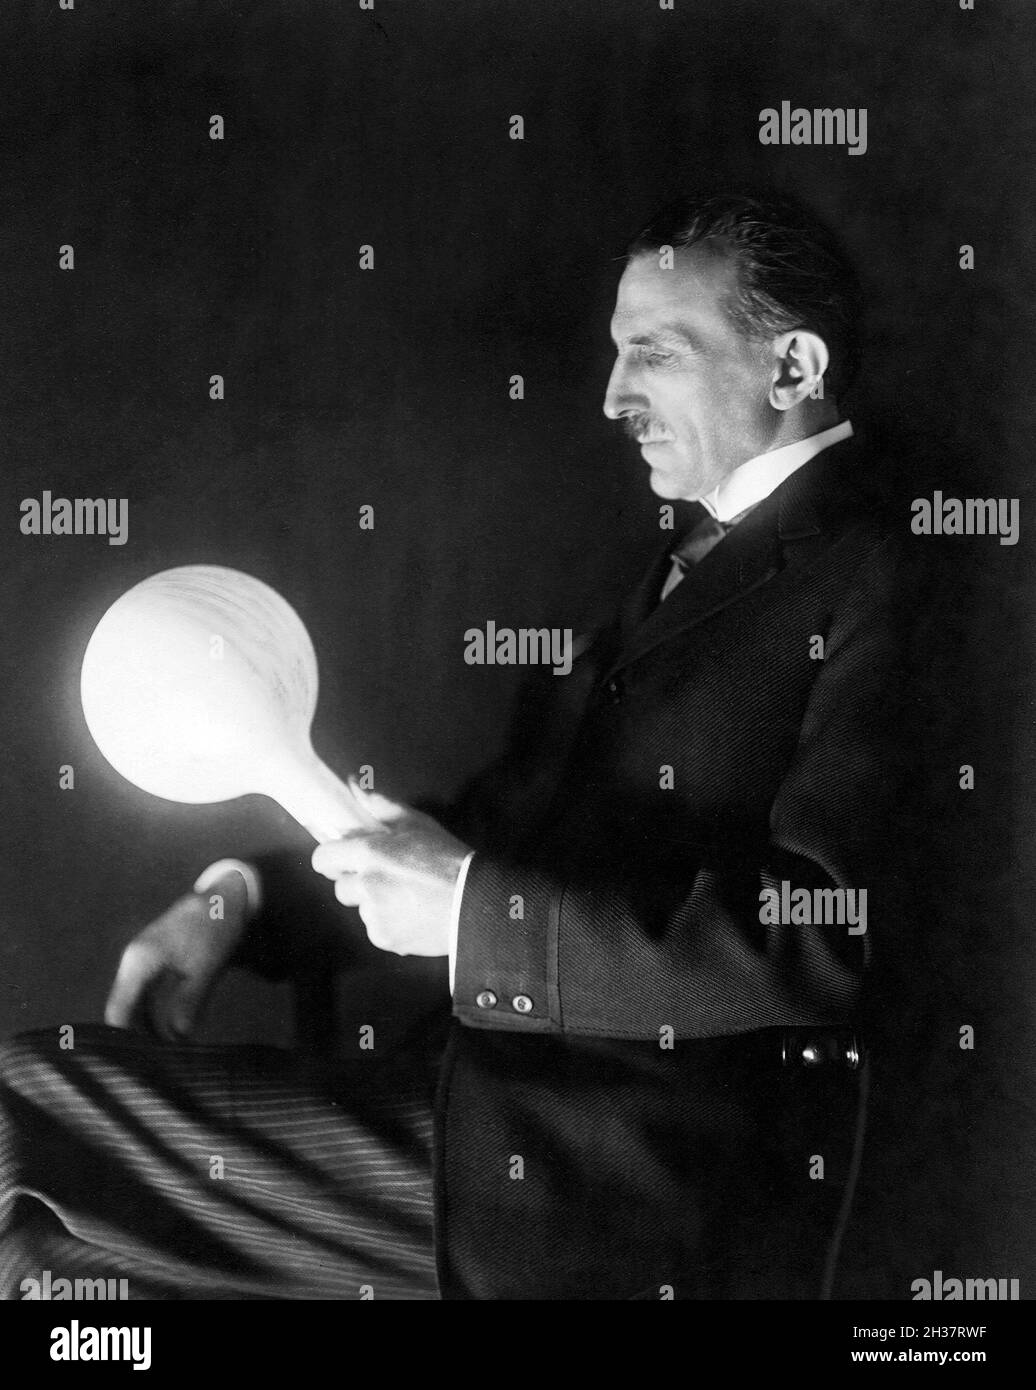 Nikola Tesla (1856-1943), 1919. Tesla in 1919 holding a gas-filled phosphor coated wireless light bulb which he developed in the 1890's to replace incandescent lamp. Stock Photo